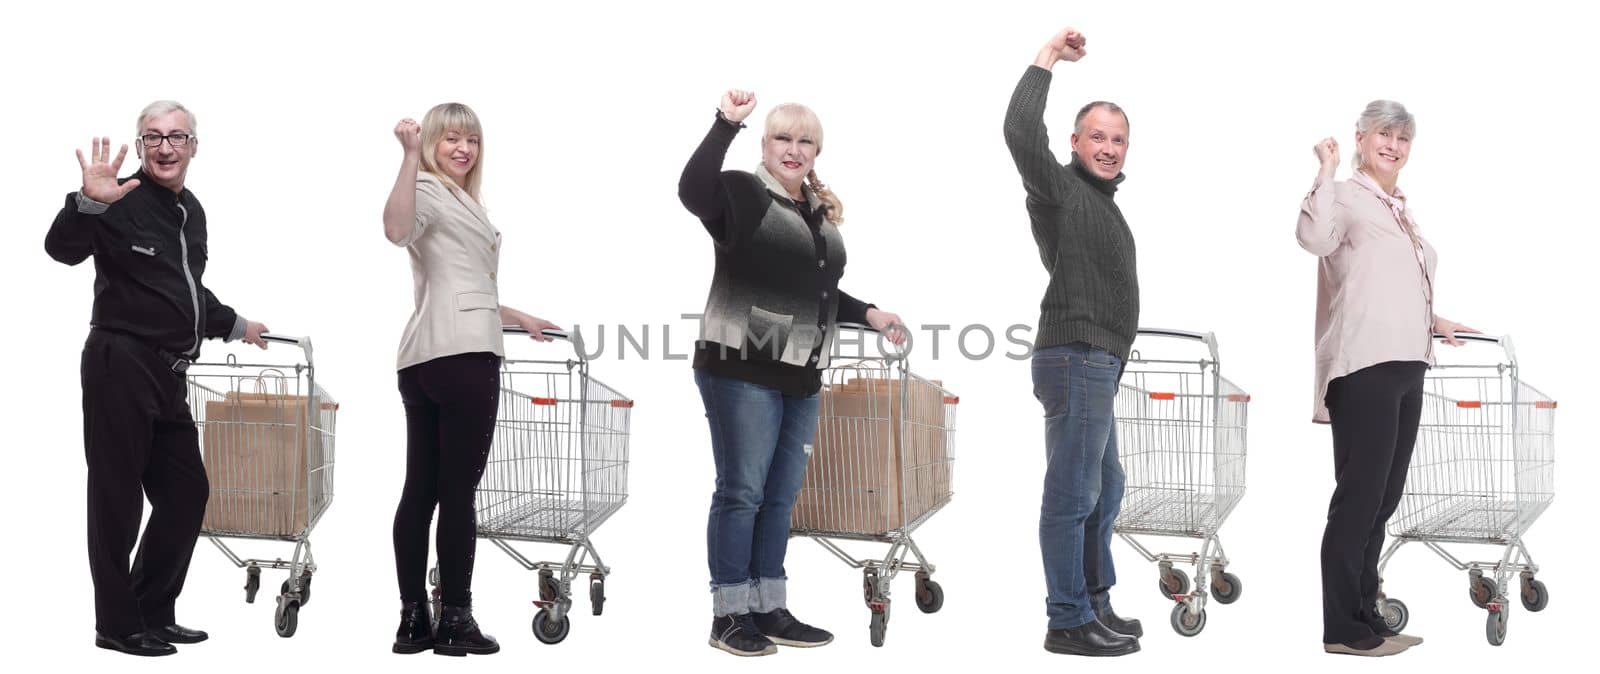 group of people with trolley greet isolated on white background